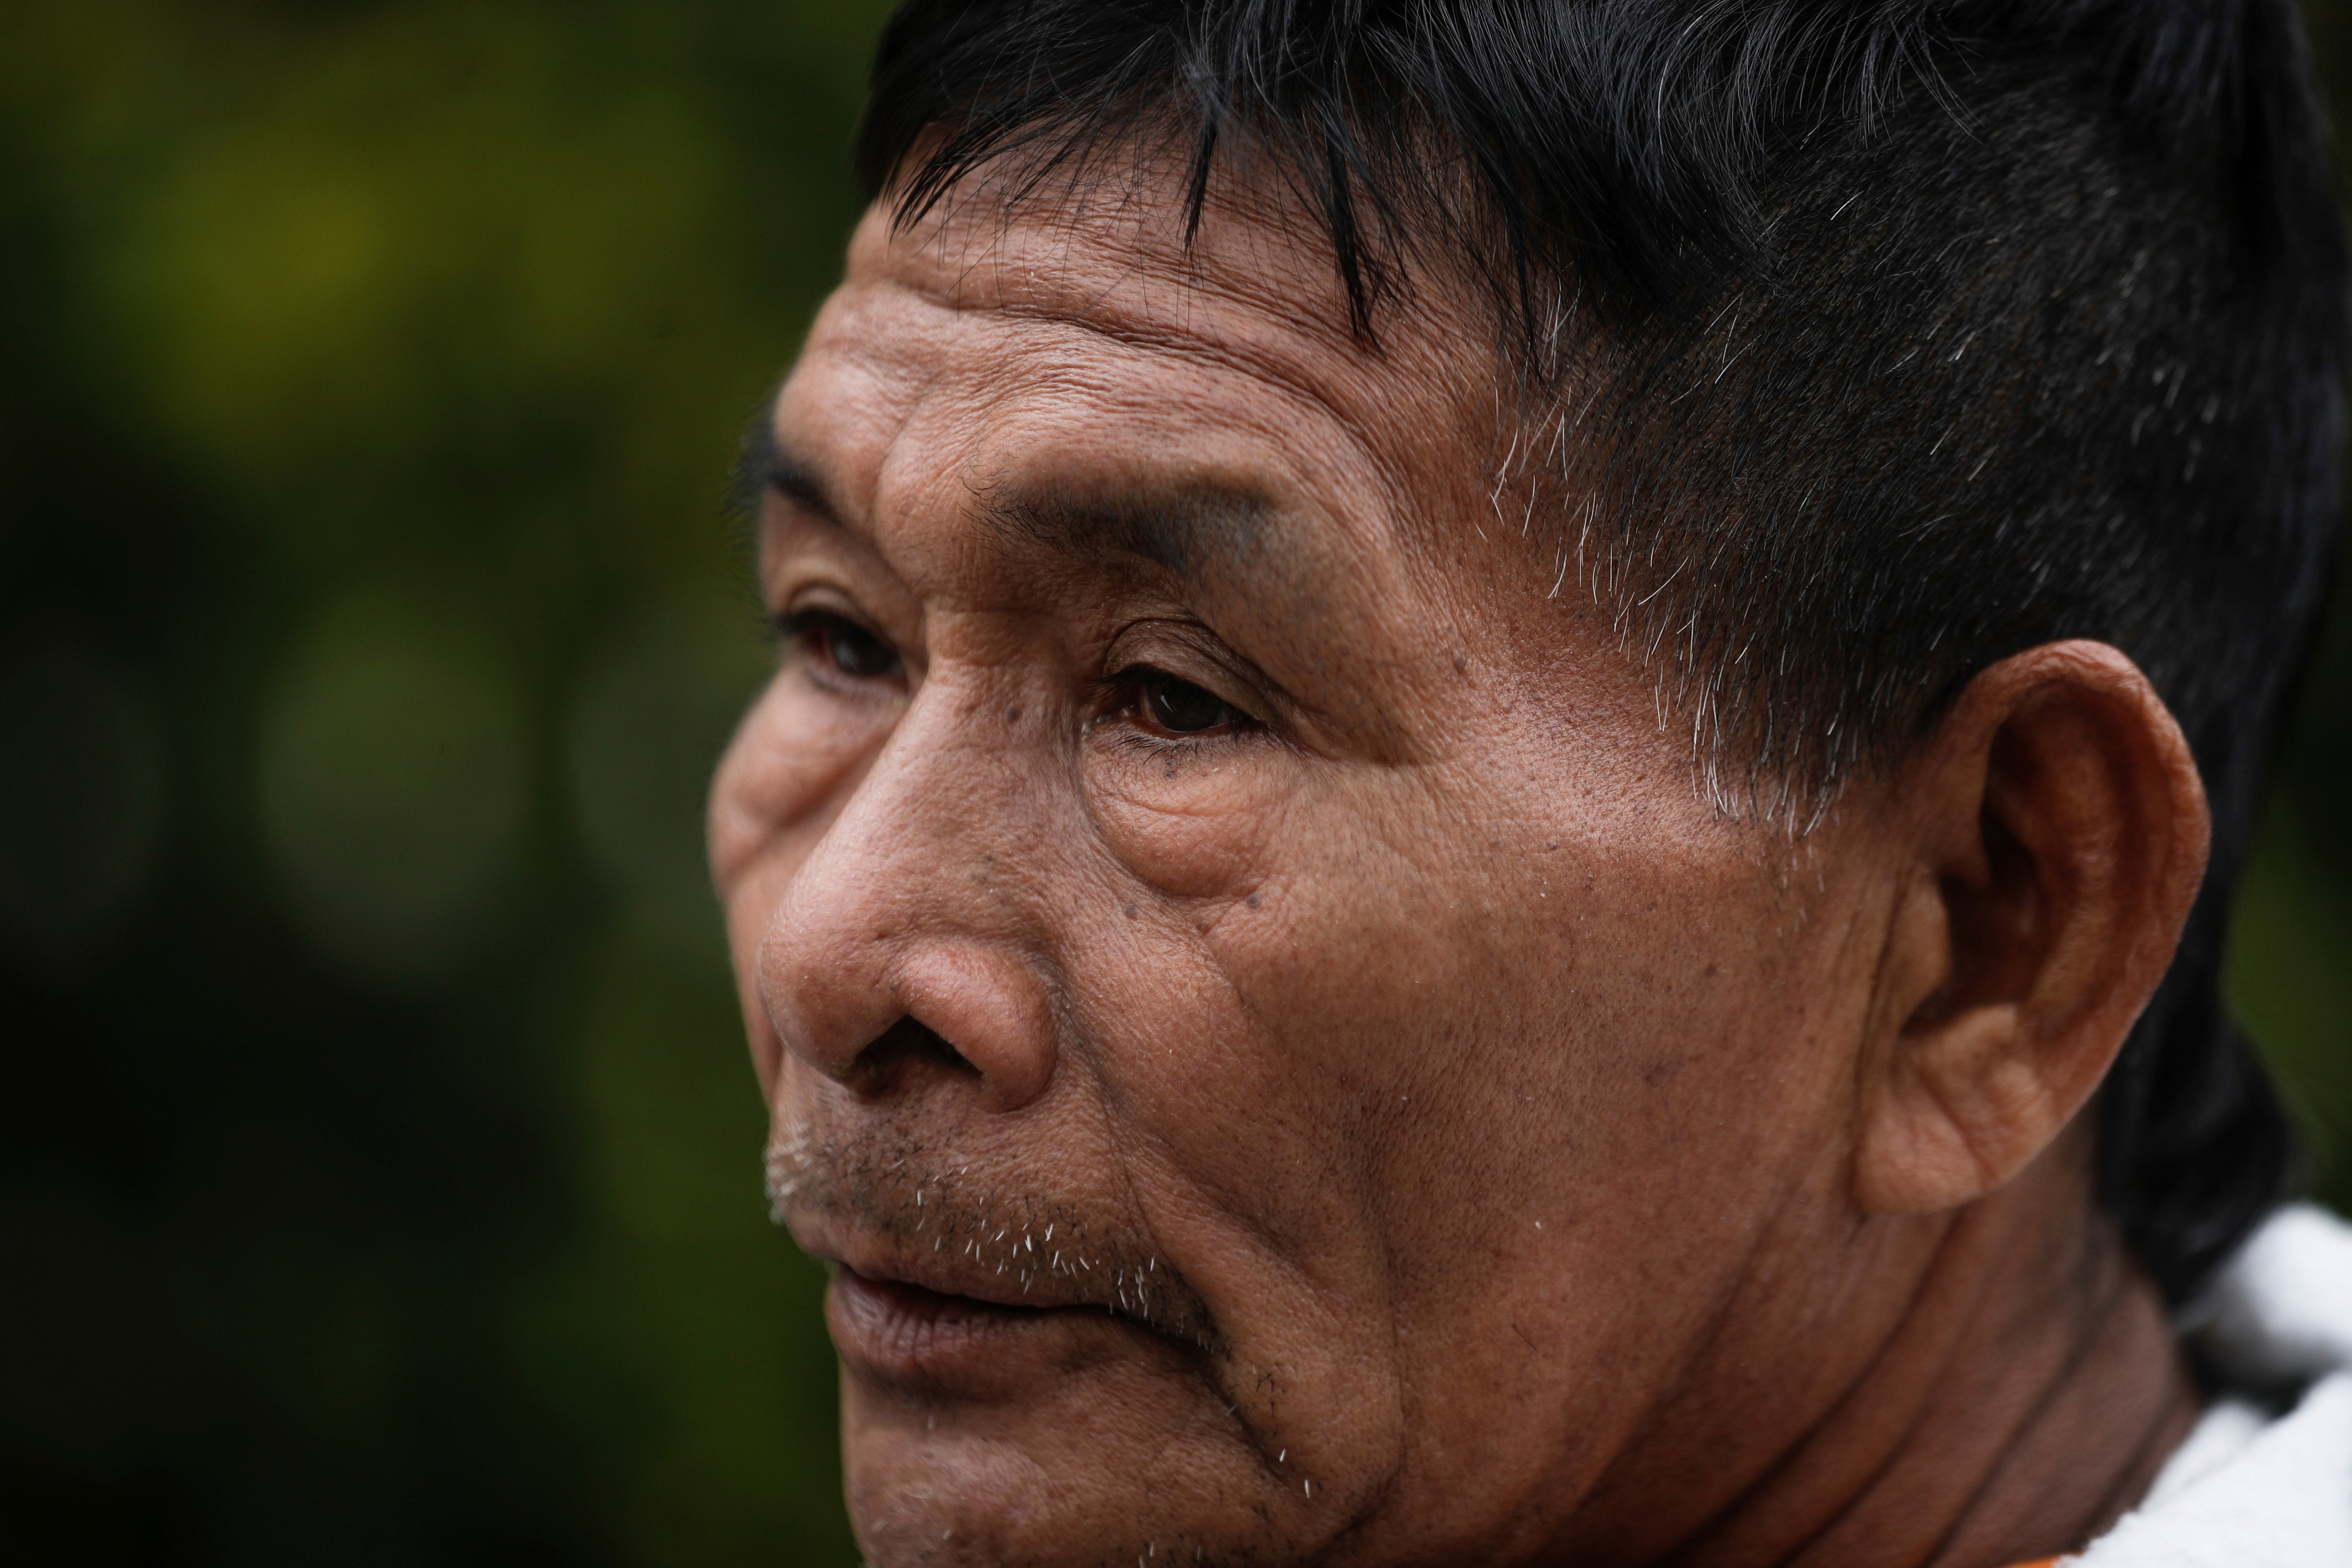 Narciso Mucutuy, the grandfather of the 4 rescued Indigenous children, speaks to the media